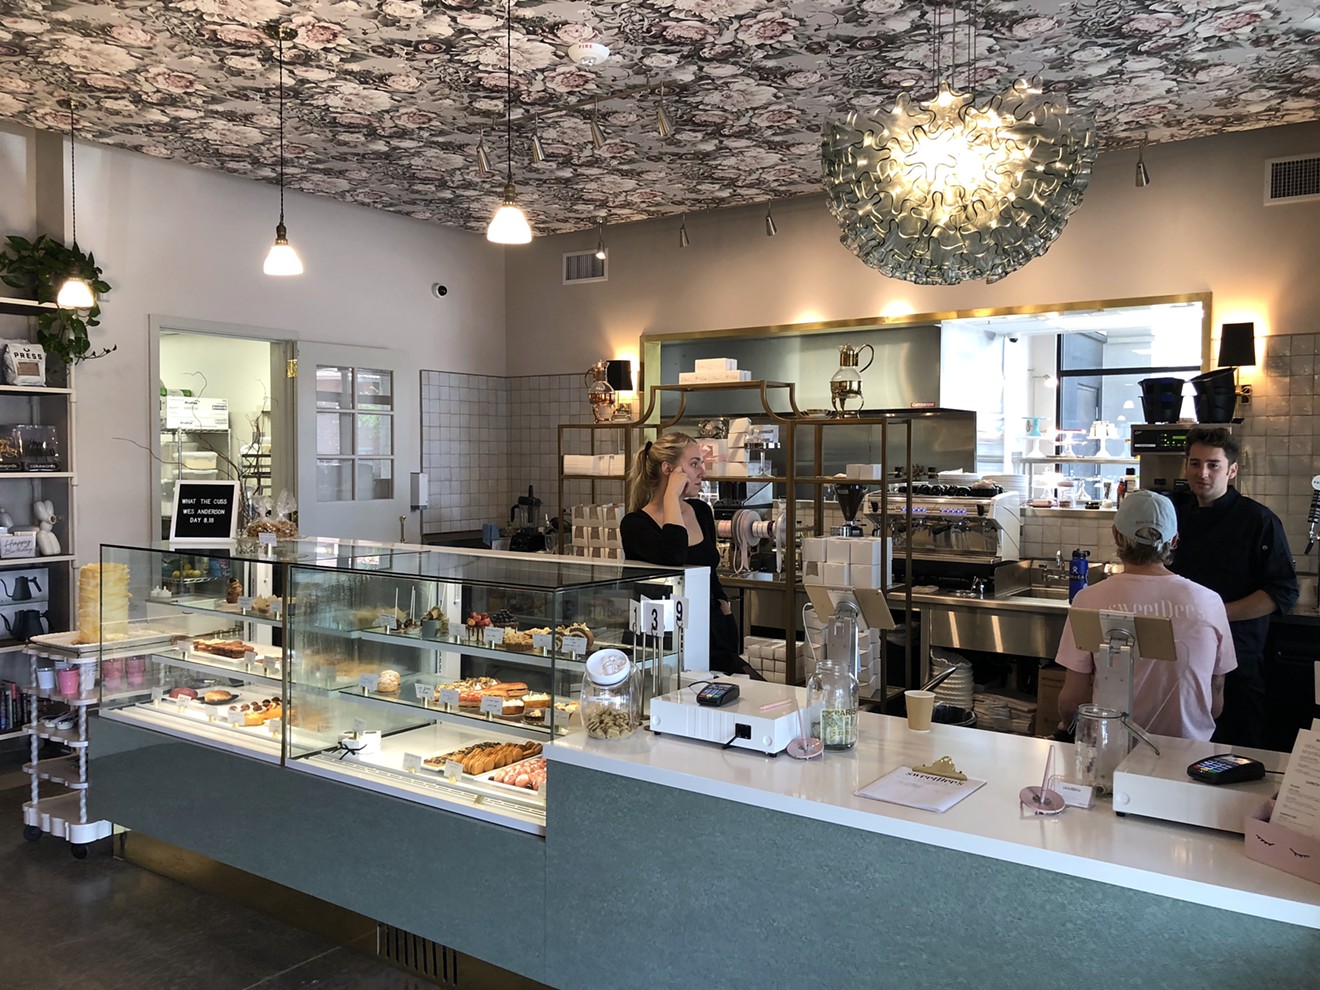 The interior of the bake shop has vibes part French, part something a lot more fun.